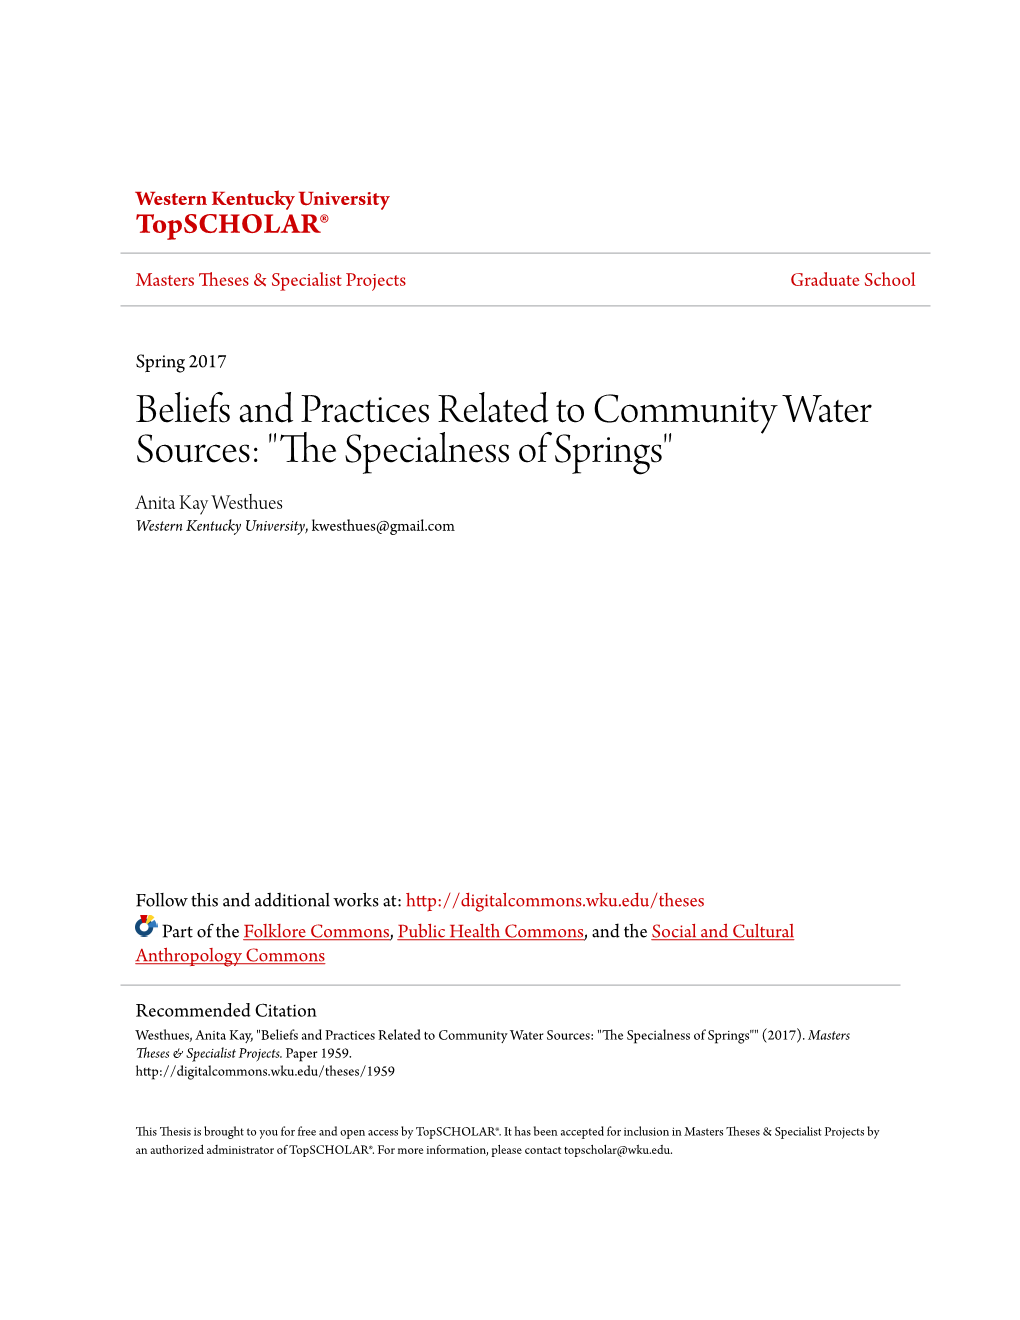 Beliefs and Practices Related to Community Water Sources: "The Ps Ecialness of Springs" Anita Kay Westhues Western Kentucky University, Kwesthues@Gmail.Com